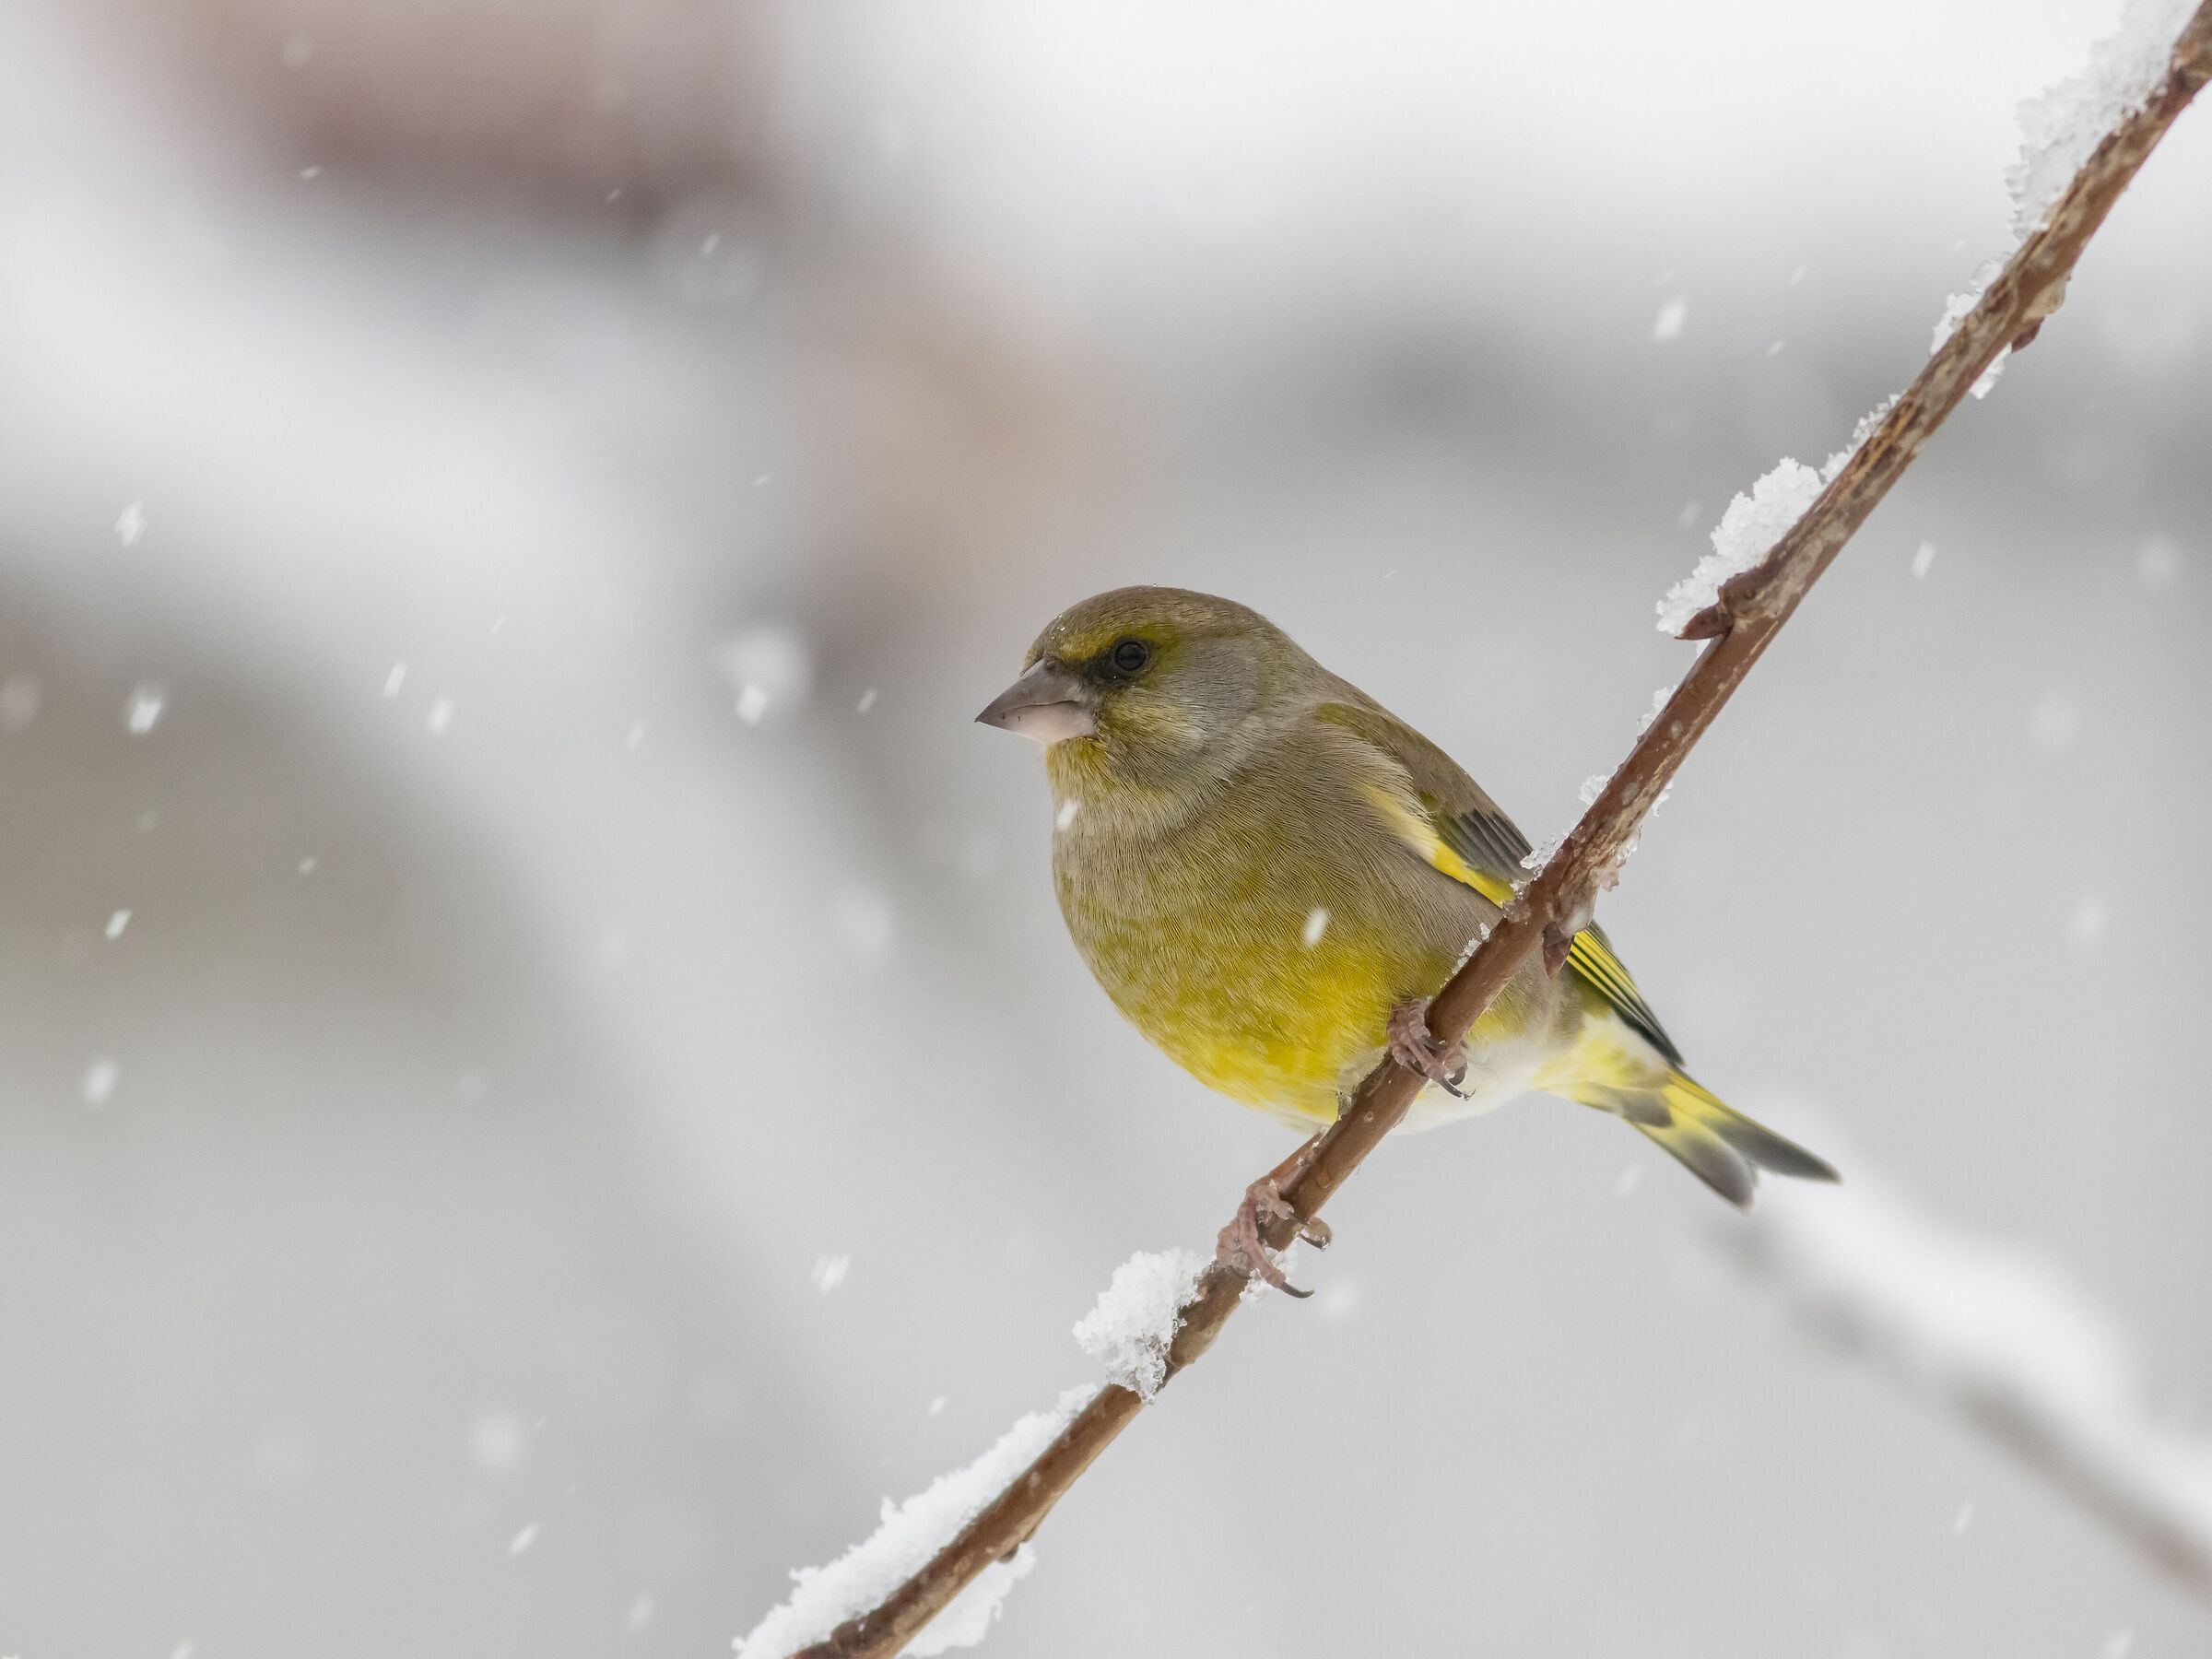 Snow arrives and greenfinches arrive...